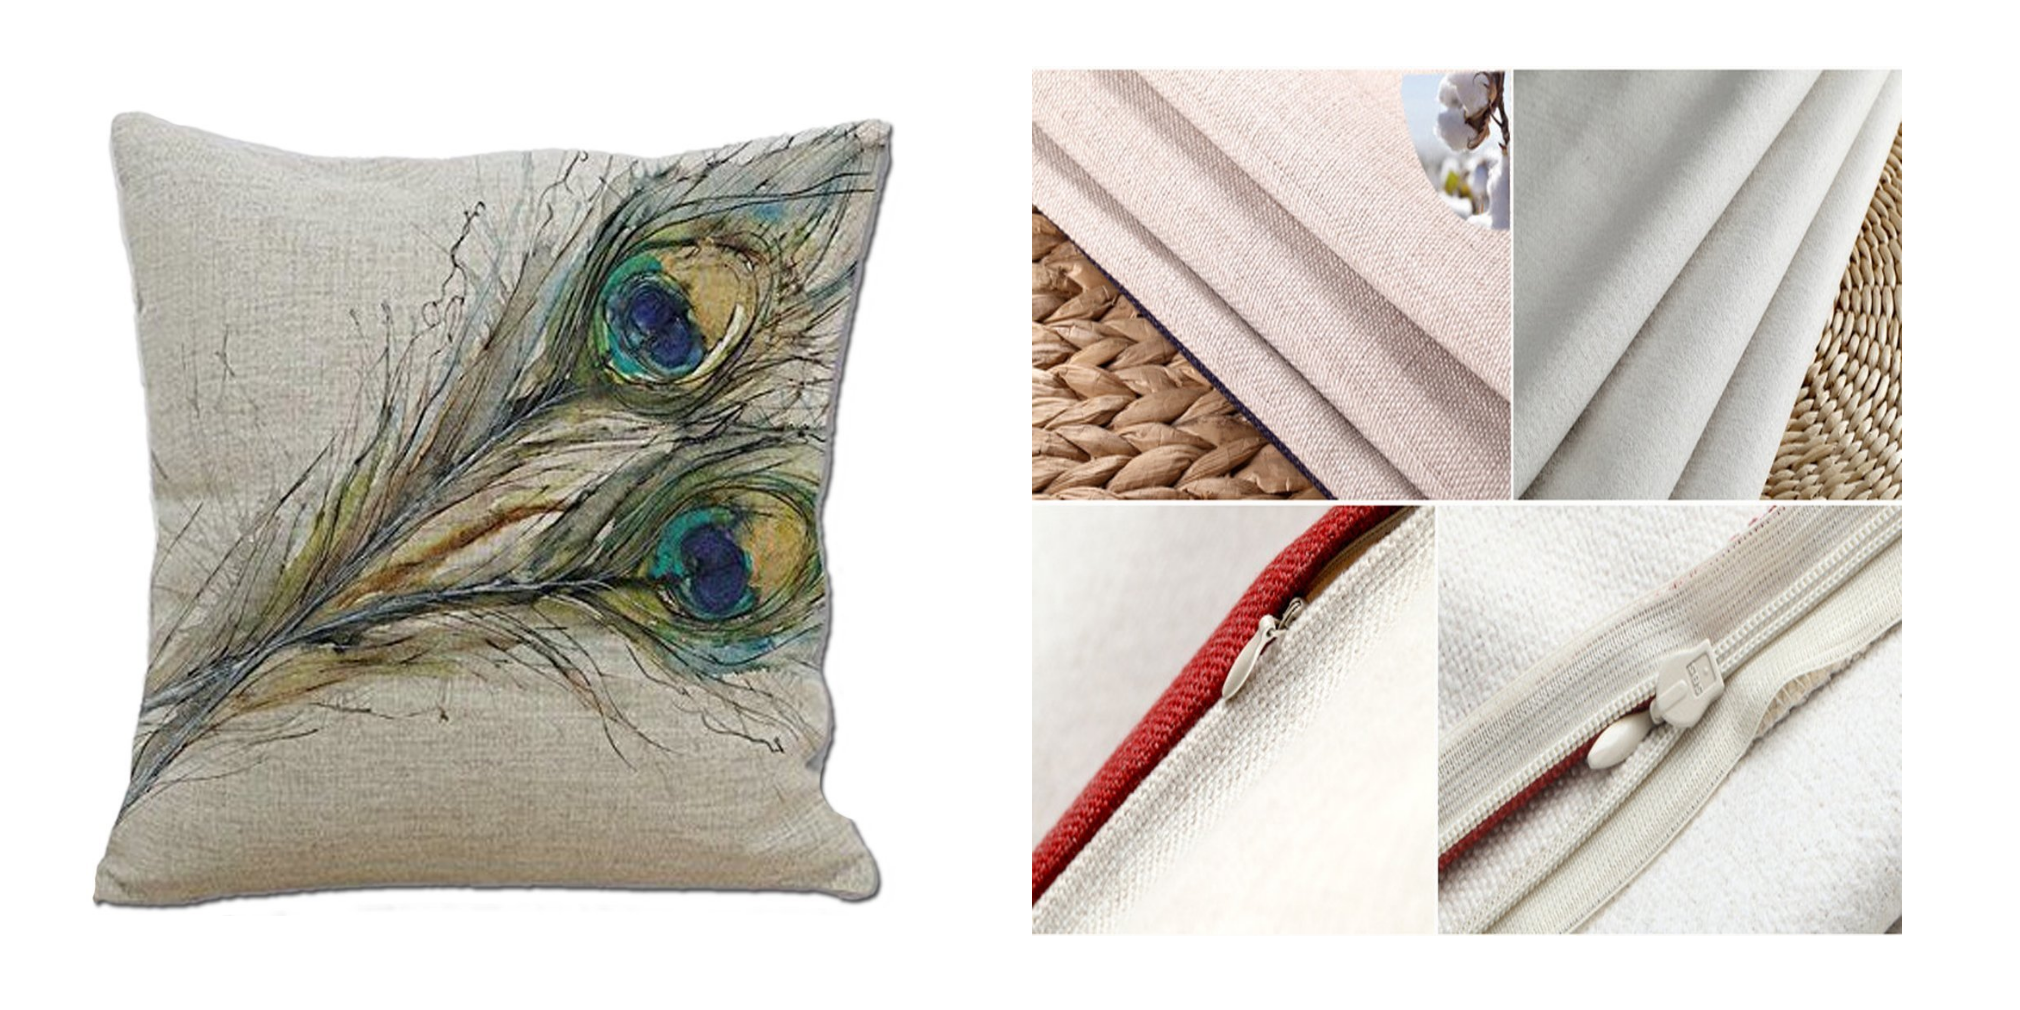 Peacock Feather Throw Pillow Cover—$1.68 SHIPPED!